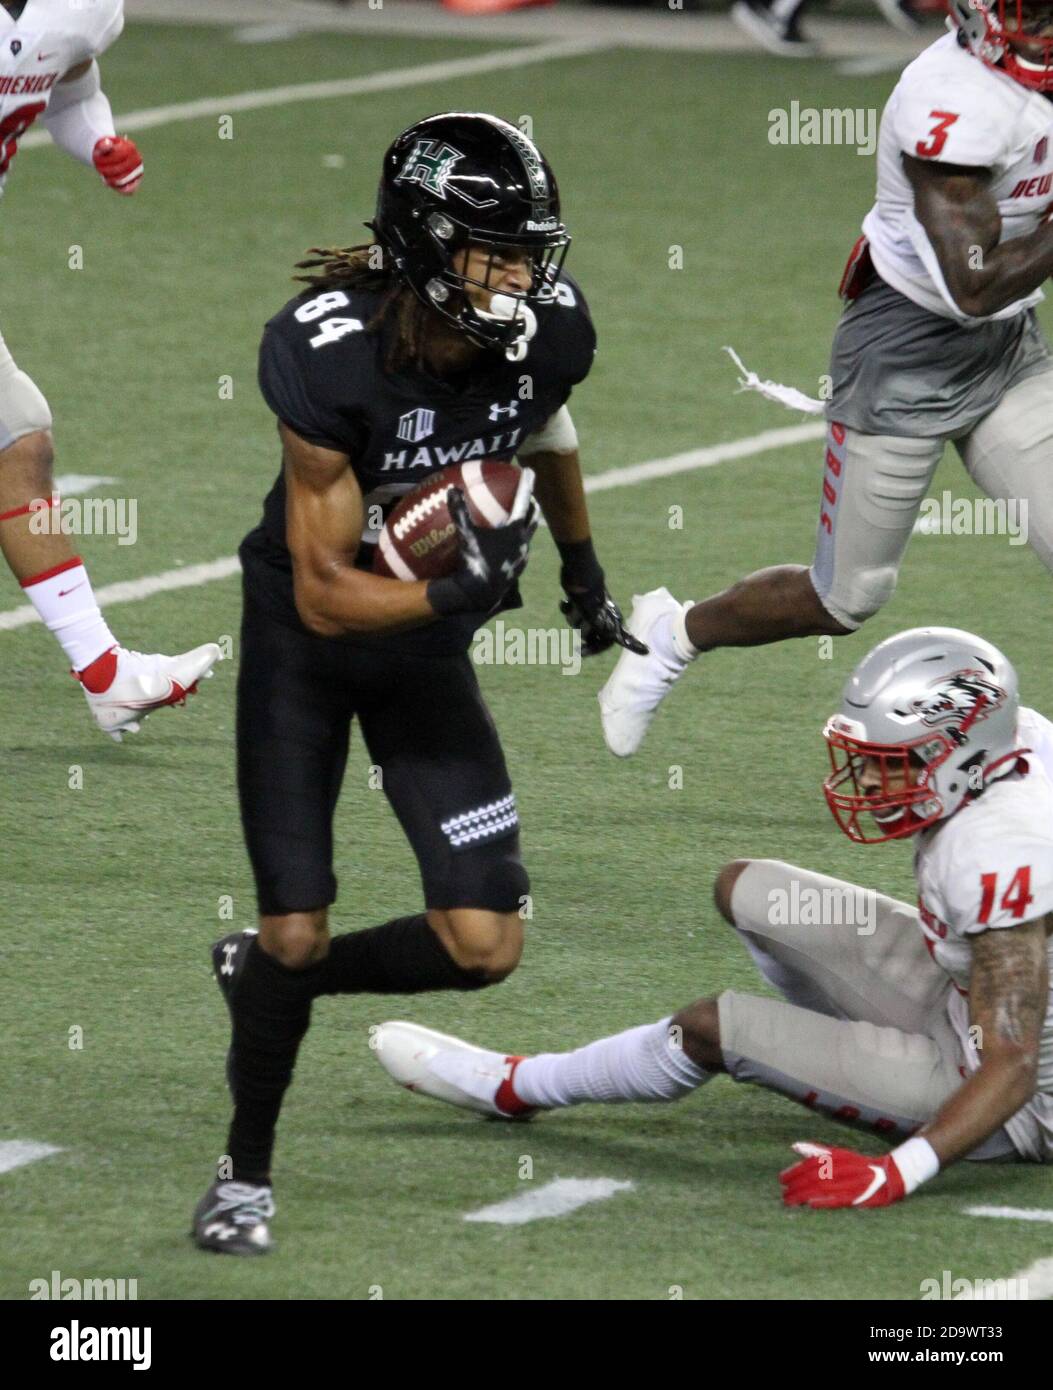 November 7, 2020 - Hawaii Rainbow Warriors wide receiver Nick Mardner #84 scores a 42 yard touchdown on this reception in the second quarter during a game between the Hawaii Rainbow Warriors and the New Mexico Lobos at Aloha Stadium in Honolulu, HI - Michael Sullivan/CSM Stock Photo